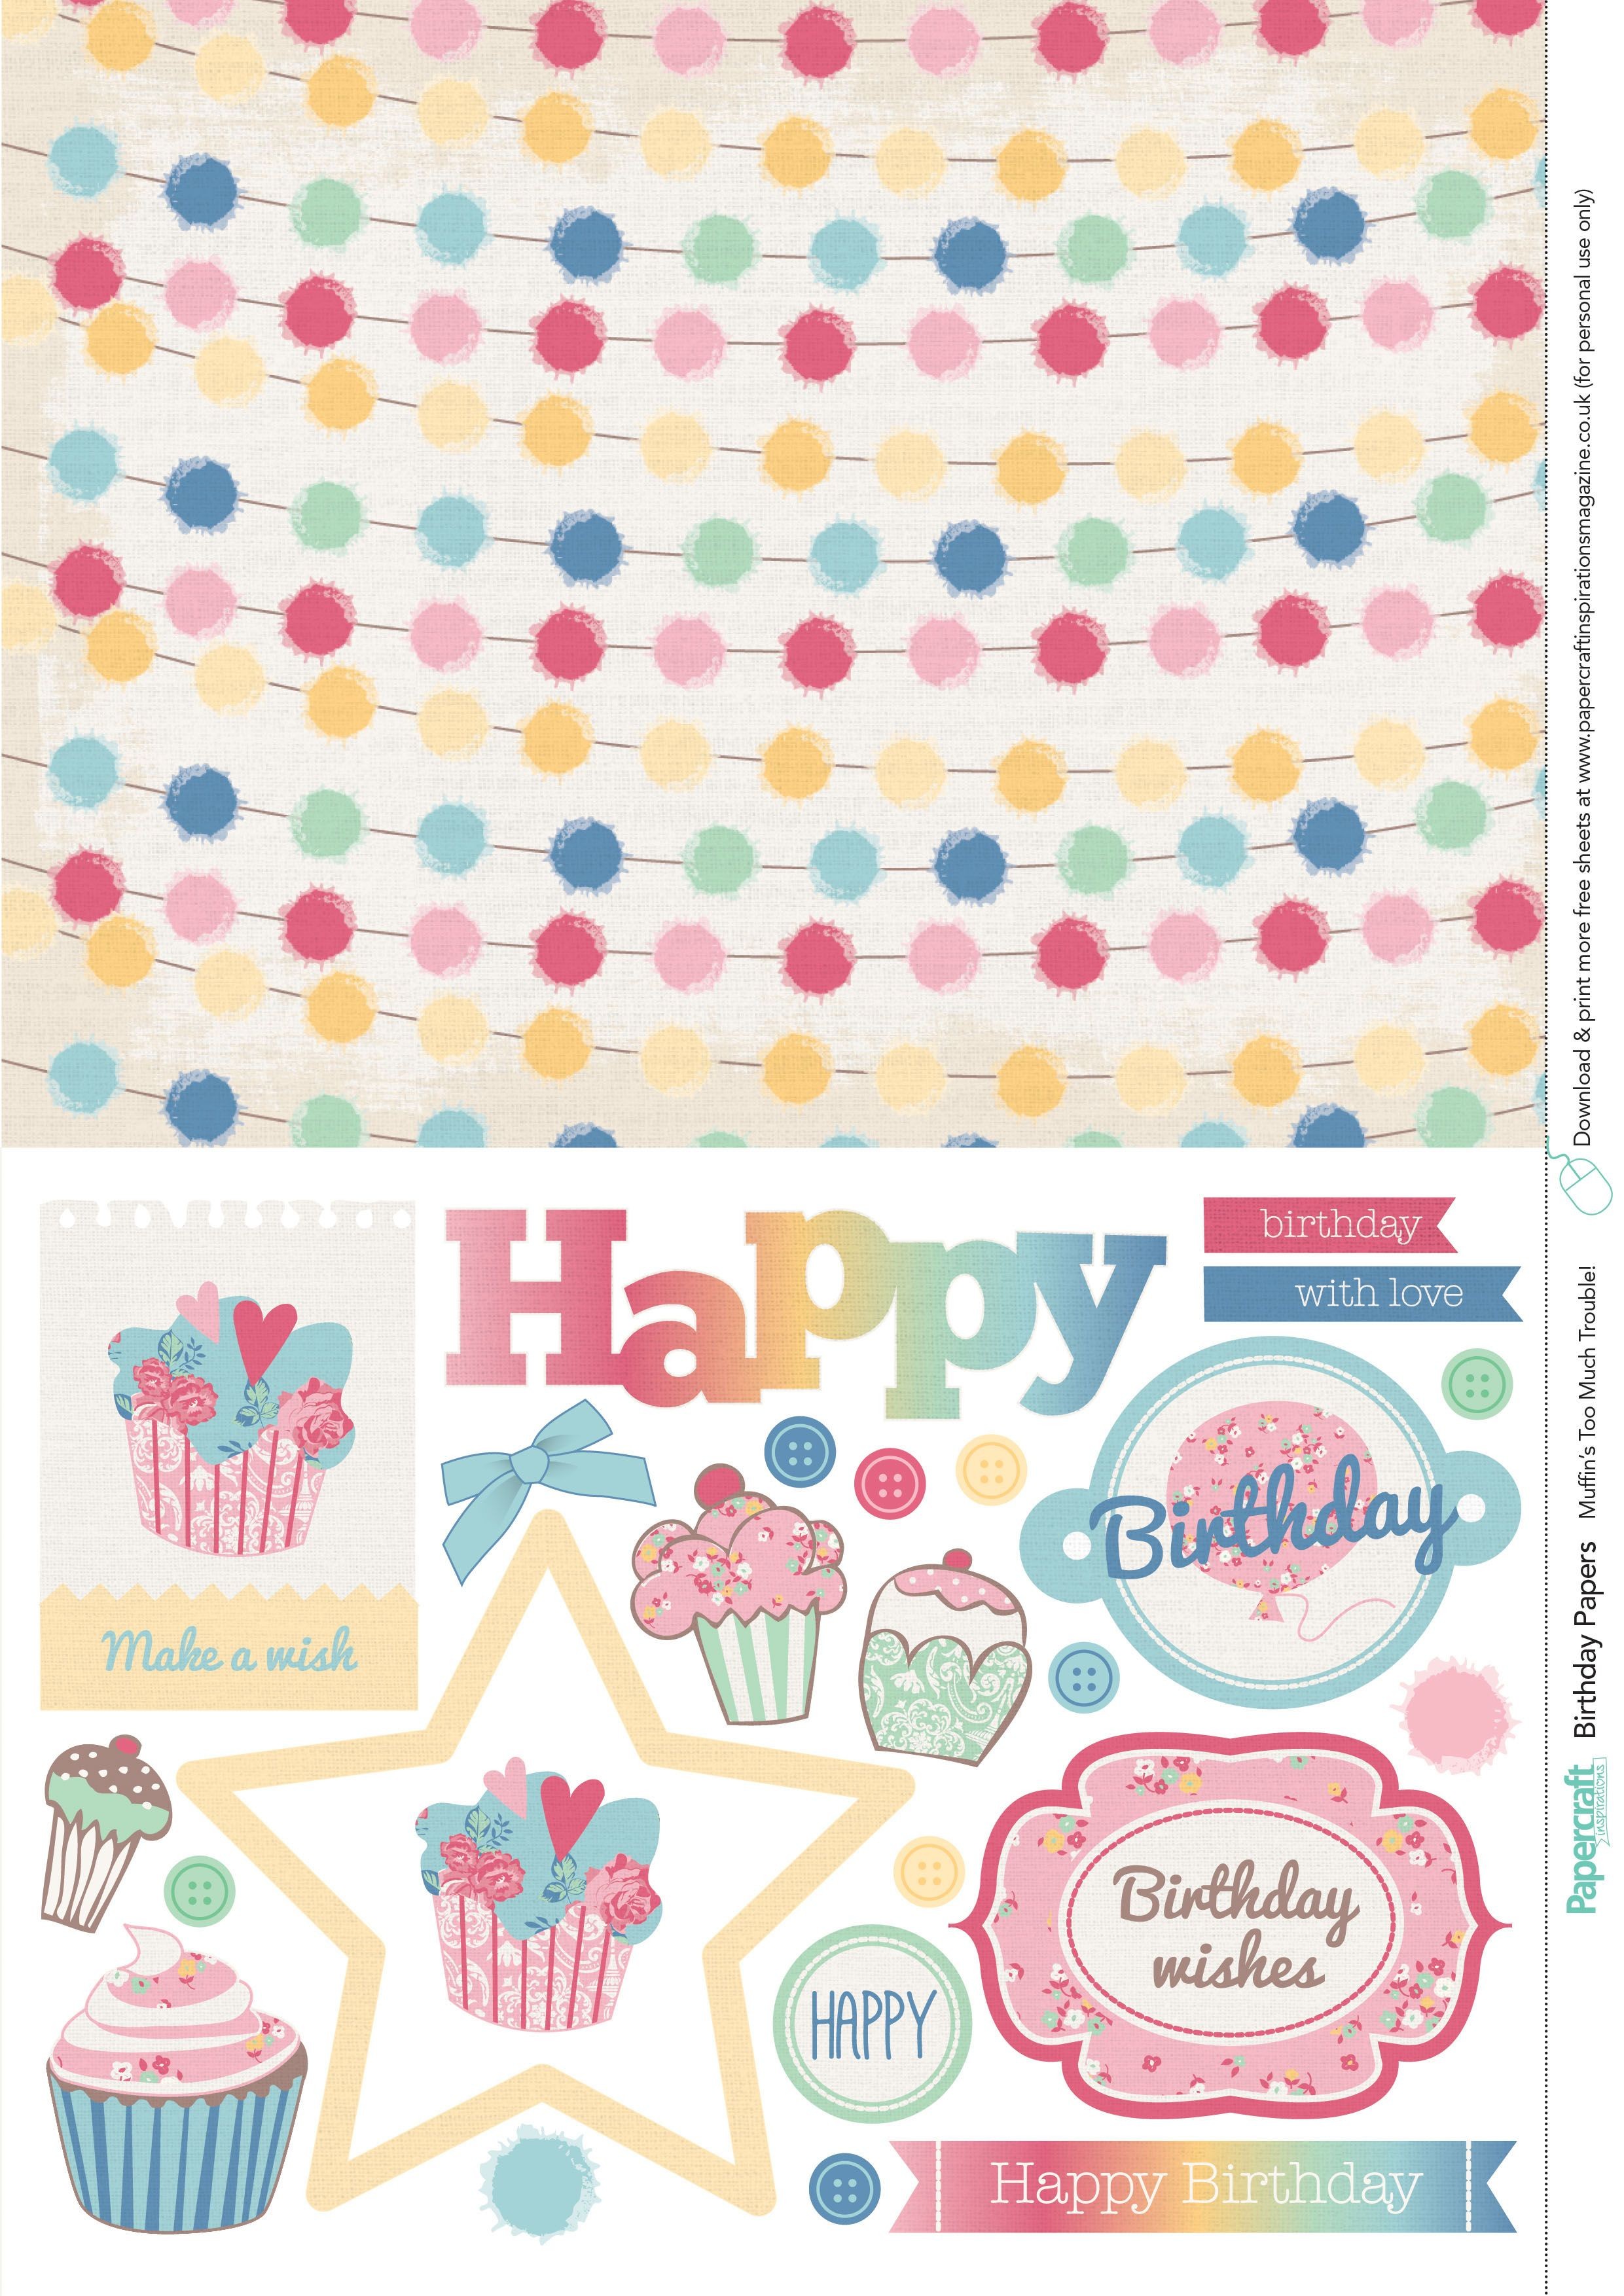 Birthday Papercraft Birthday Free Printable Papers From Papercraft Inspirations 151